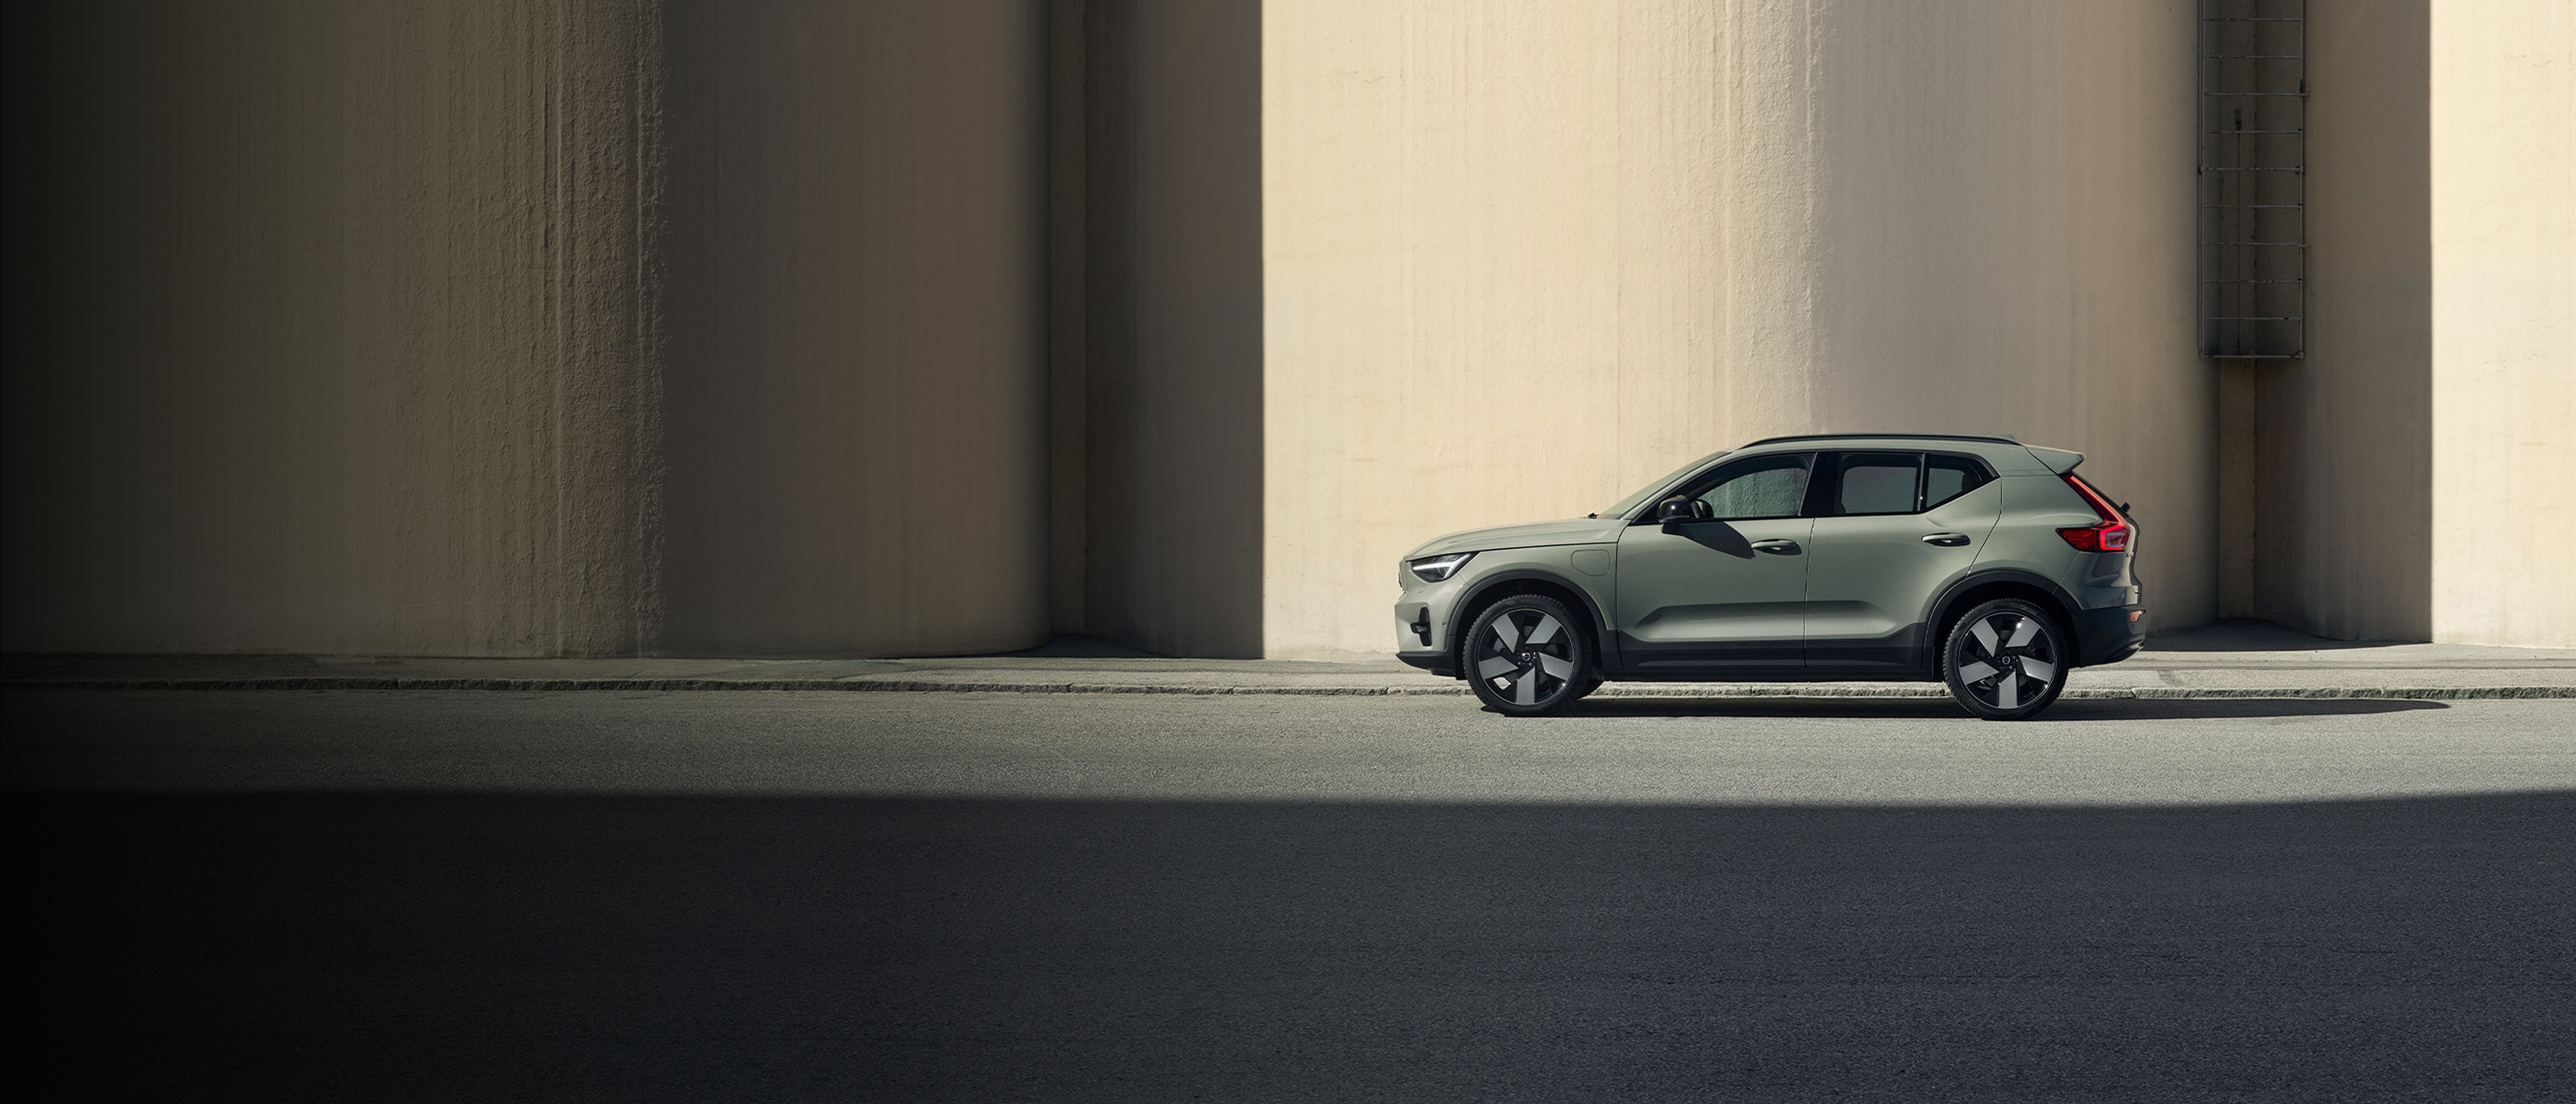 A silver Volvo XC40 SUV with reimagined design details.